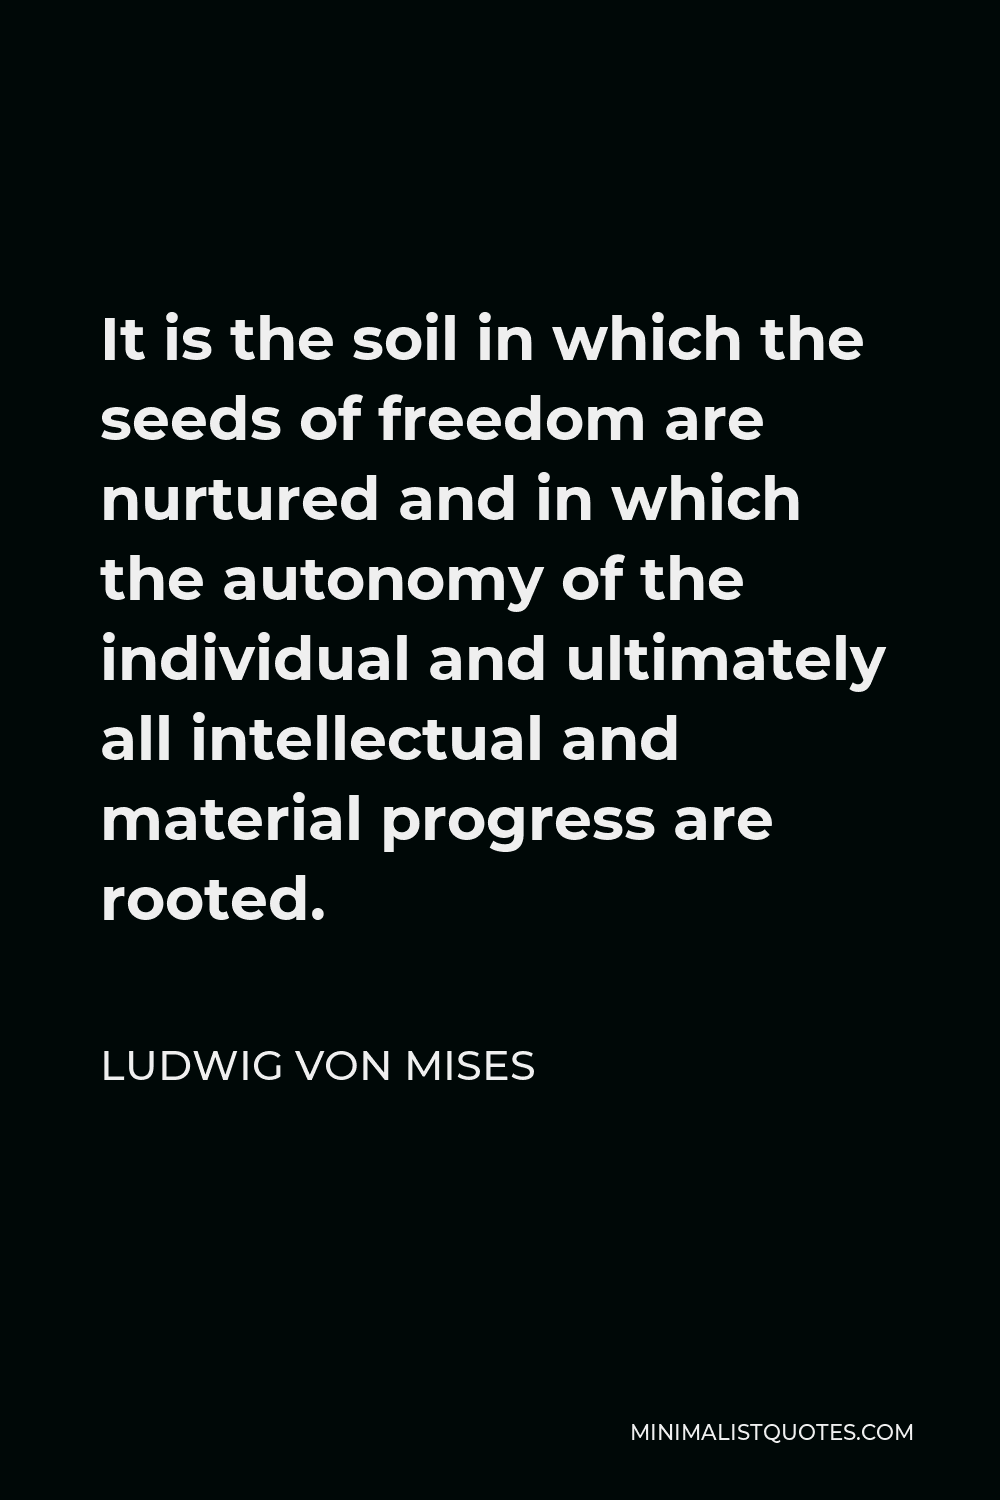 Ludwig von Mises Quote - It is the soil in which the seeds of freedom are nurtured and in which the autonomy of the individual and ultimately all intellectual and material progress are rooted.